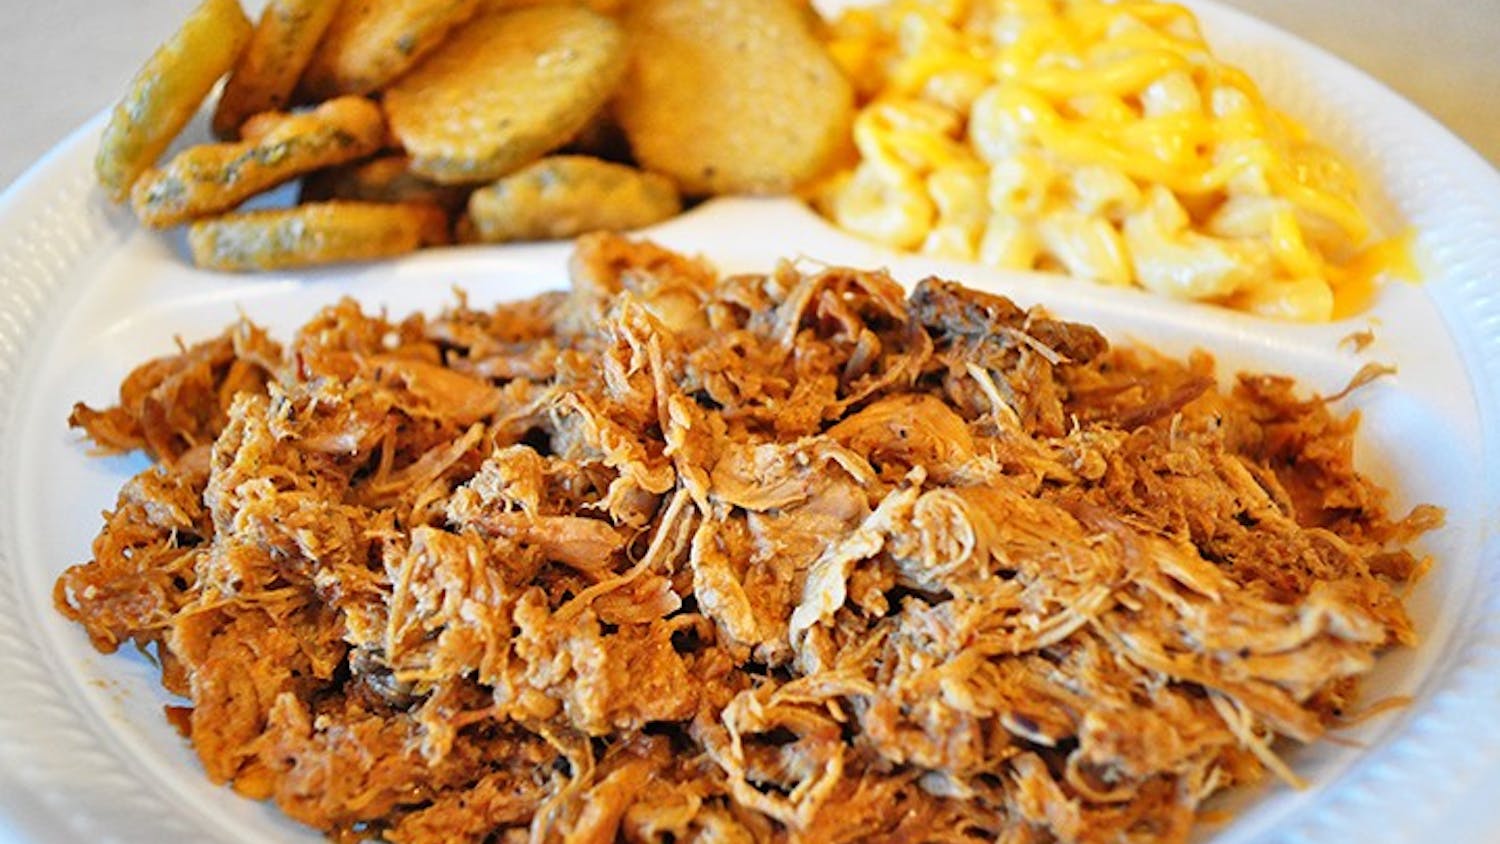 Pulled pork plate with fried pickle chips and mac'n'cheese